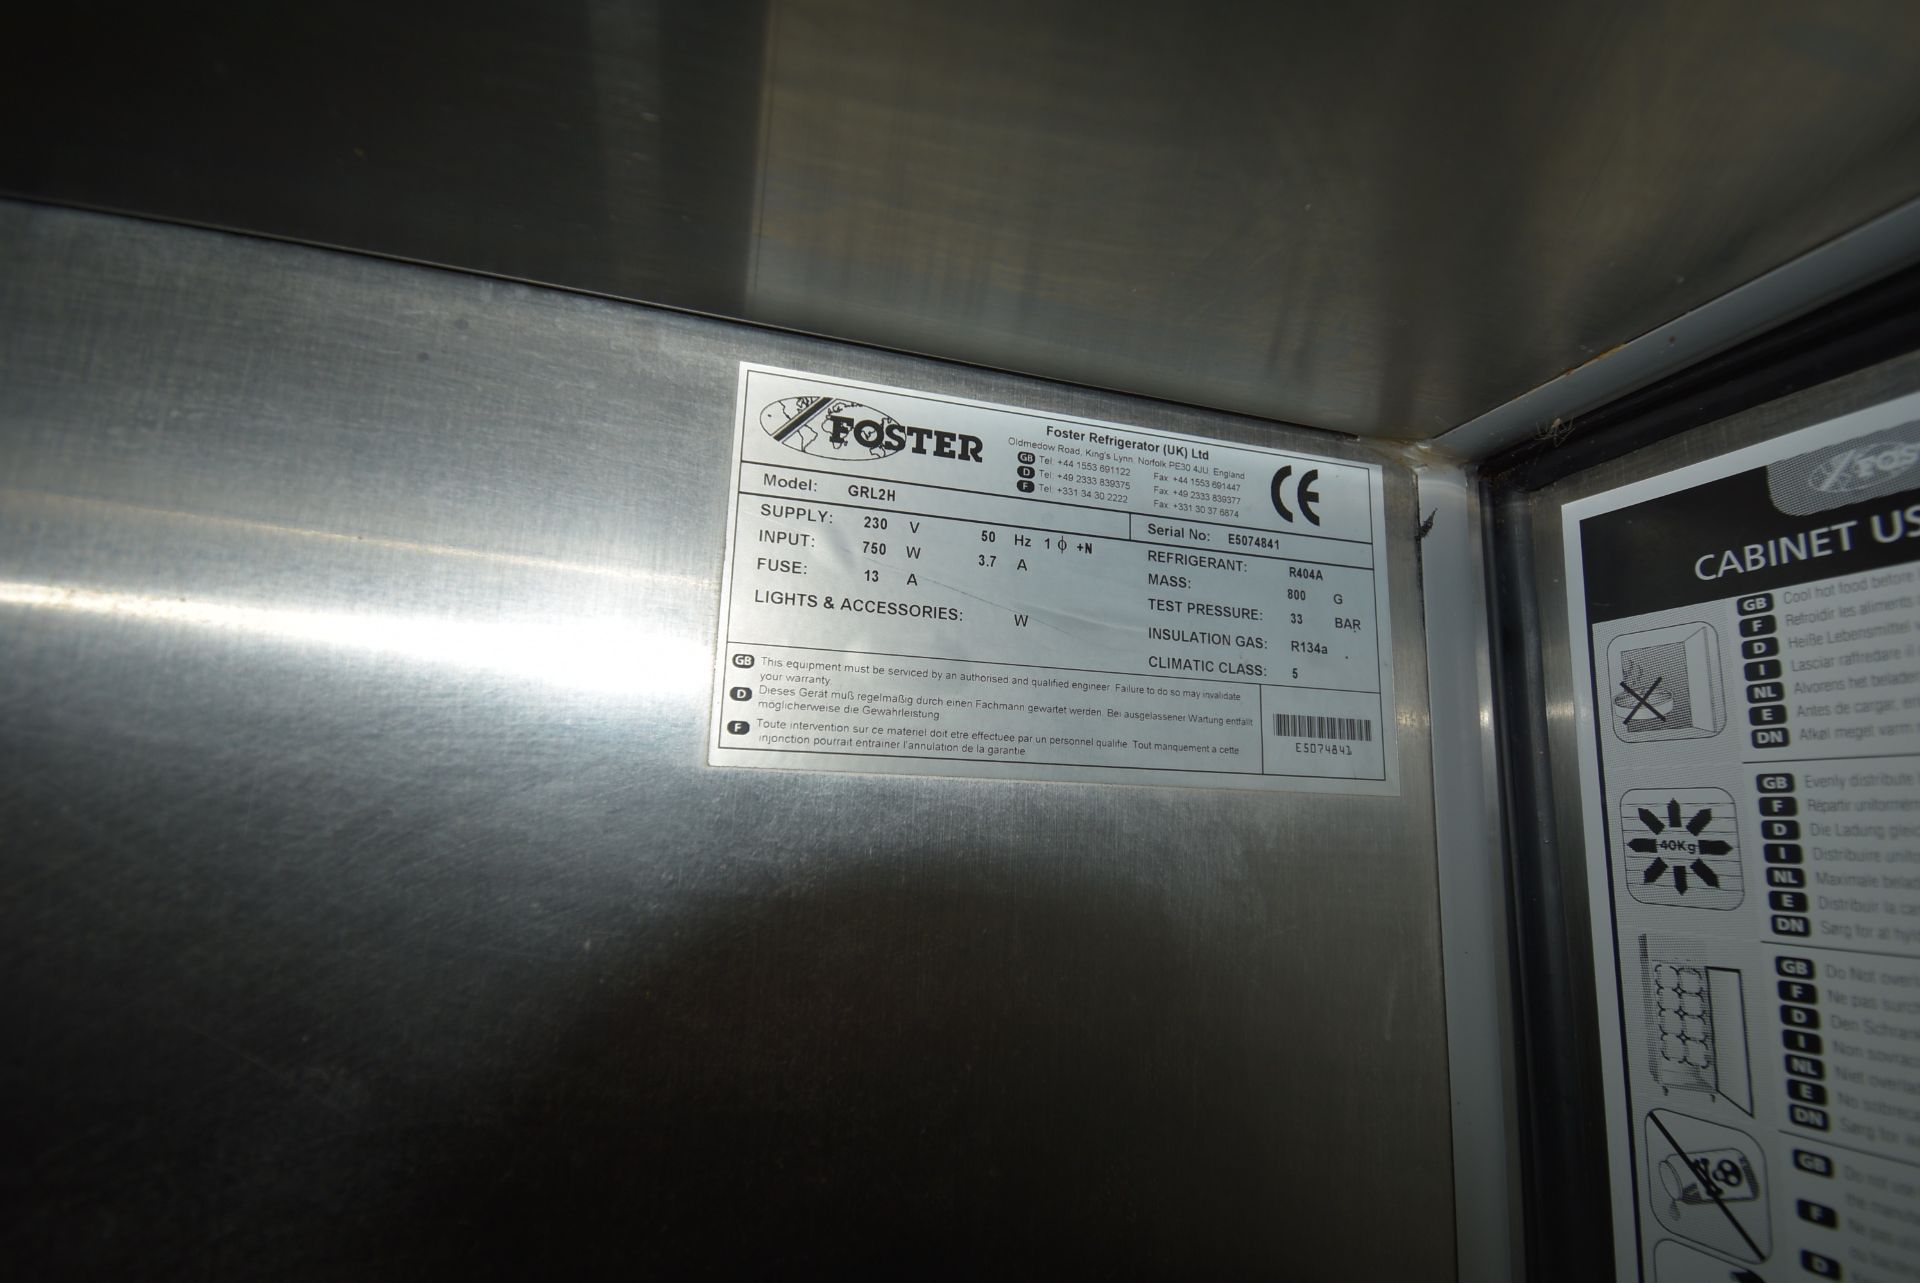 Foster Stainless Steel Two Door Refrigerator Model: GRL2H, Single Phase - Image 3 of 3